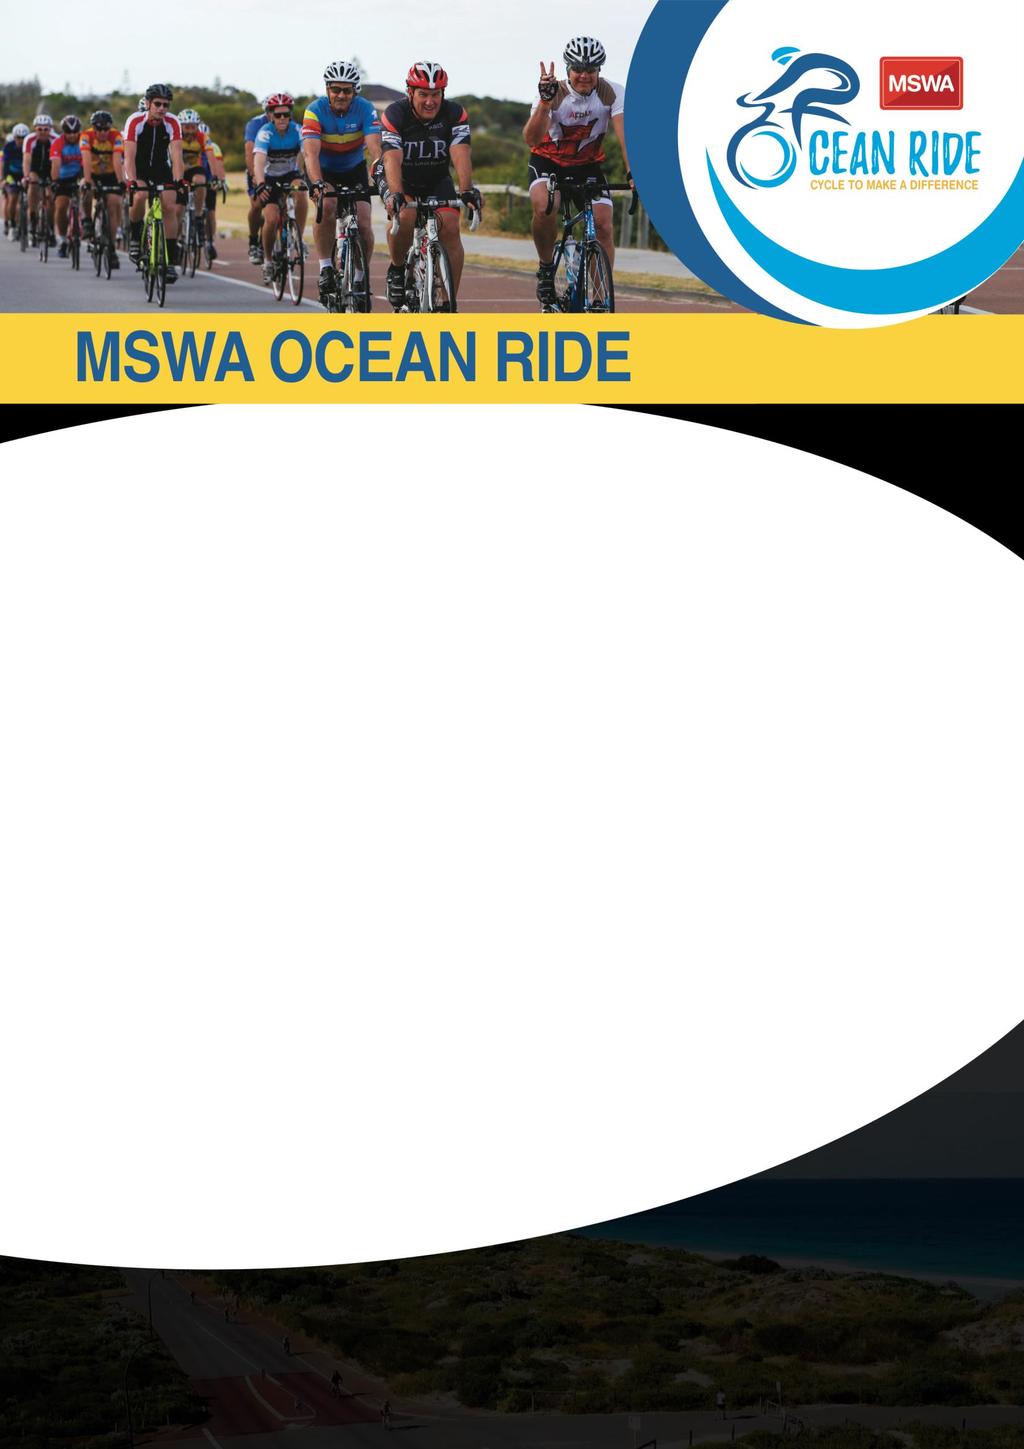 The MSWA Ocean Ride is a unique cycling event following Western Australia s beautiful coastline from Fremantle to Hillarys.